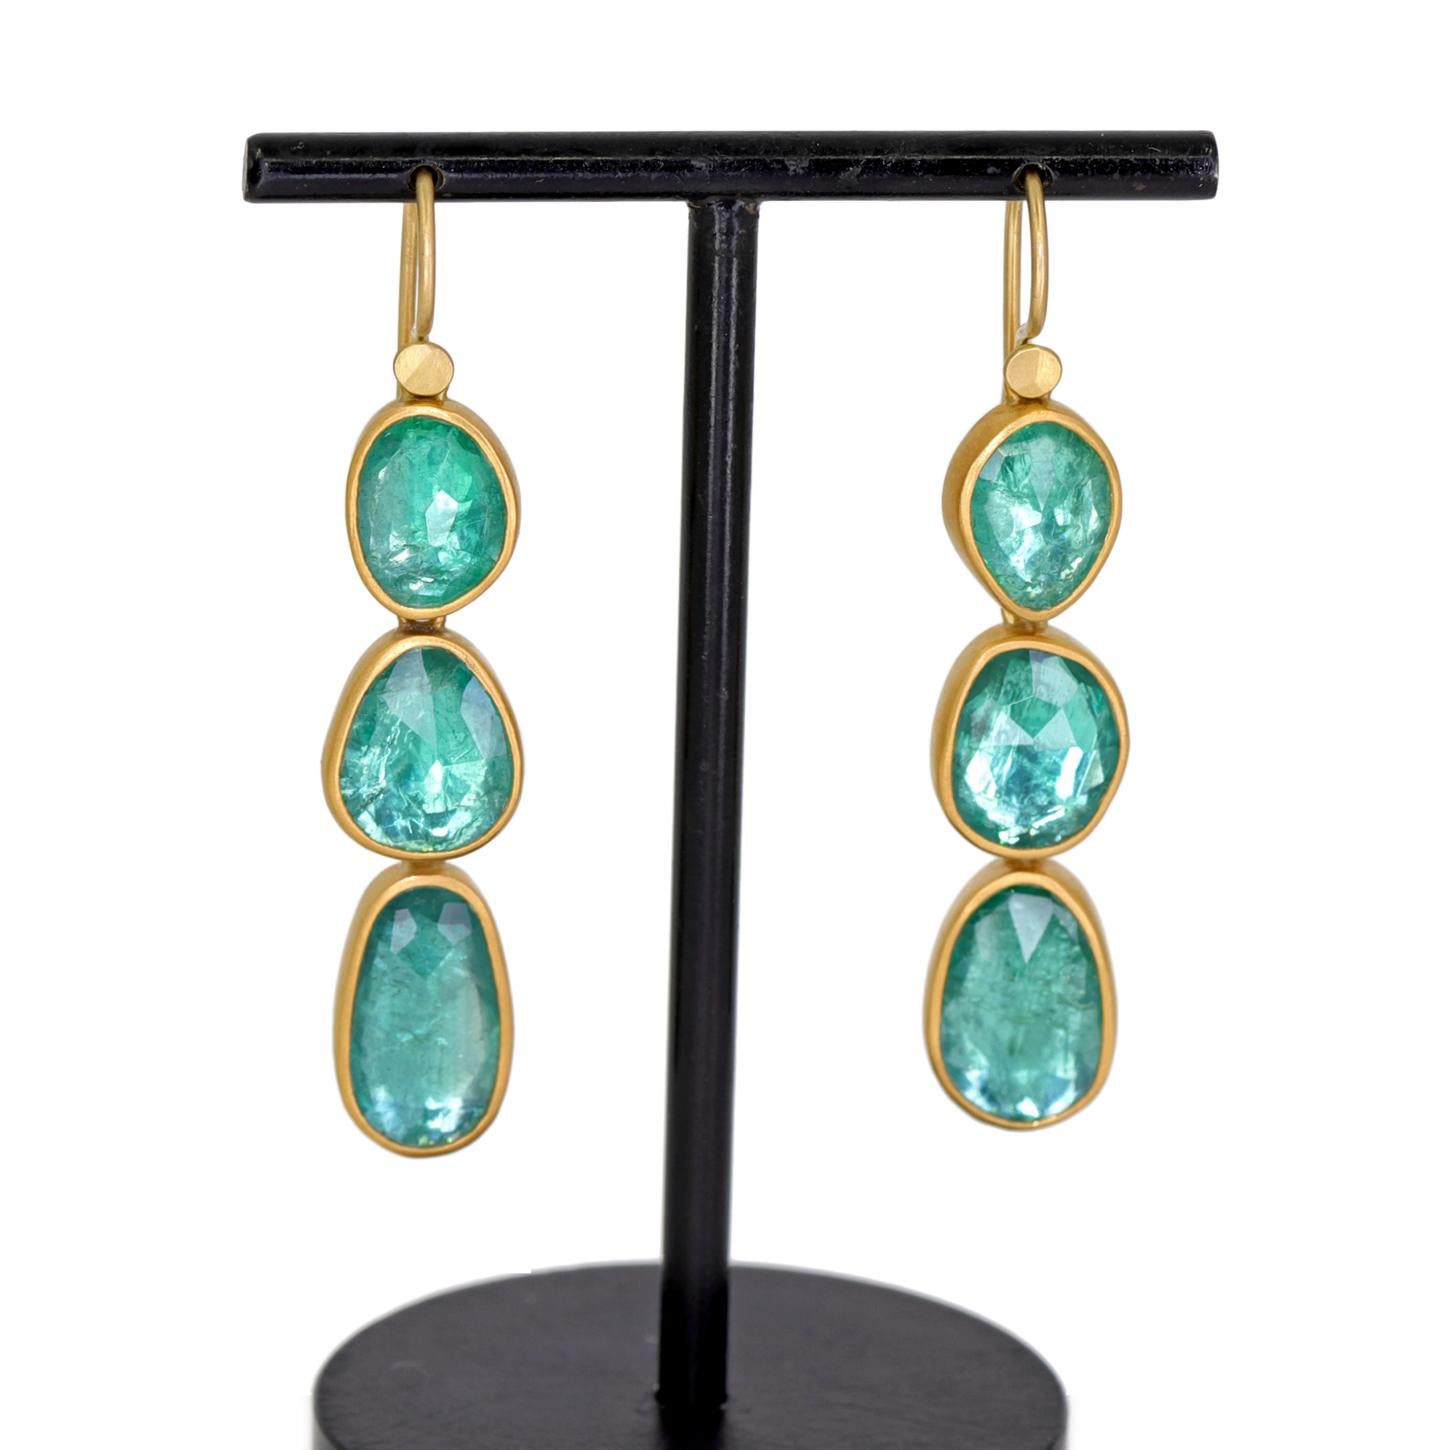 One of a Kind Triple Drop Earrings by award-winning jewelry maker Lola Brooks, hand-fabricated in her signature-finished 22k yellow gold featuring six shimmering rose-cut emeralds totaling 9.18 carats, each bezel-set and finished with Lola's